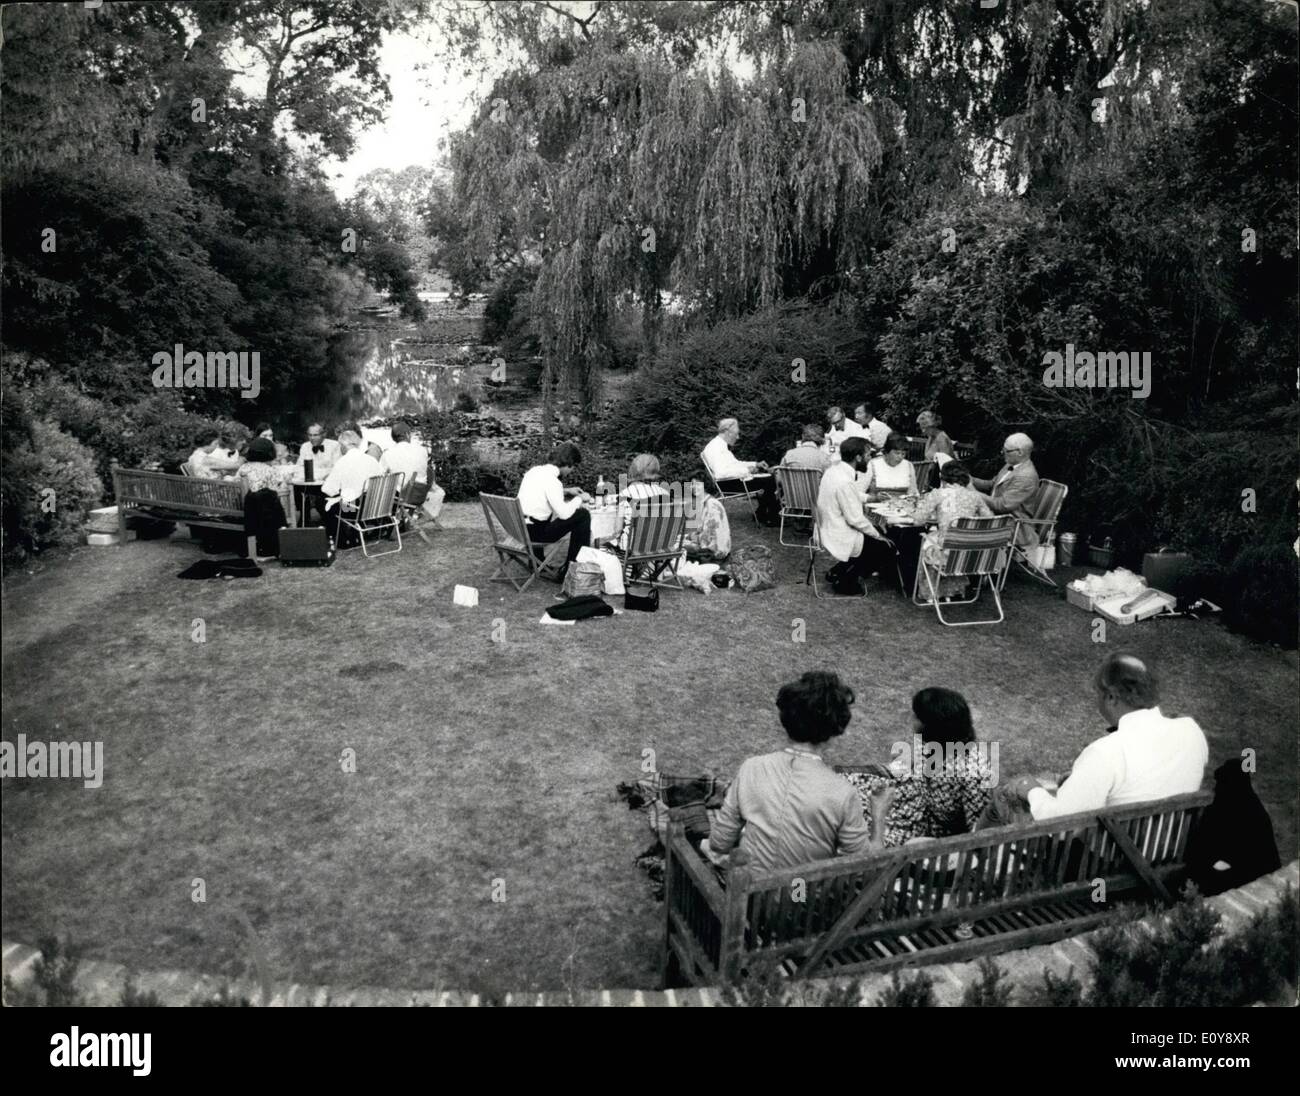 Feb. 02, 1969 - Despite the scorching temperatures, presently sweeping through Britain, traditional behavior at Glyndebourne, the home of music lovers, has not altered very much. As is the usual practice, during the dinner interval the fraternity that frequent this musical paradise, take to the spacious lawns and fields to enjoy a traditional champagne dinner, with the men clad in full evening dress and ladies likewise. Our photographer visited Glyndebourne this week, to see how the guests were coping with the heatwave Stock Photo